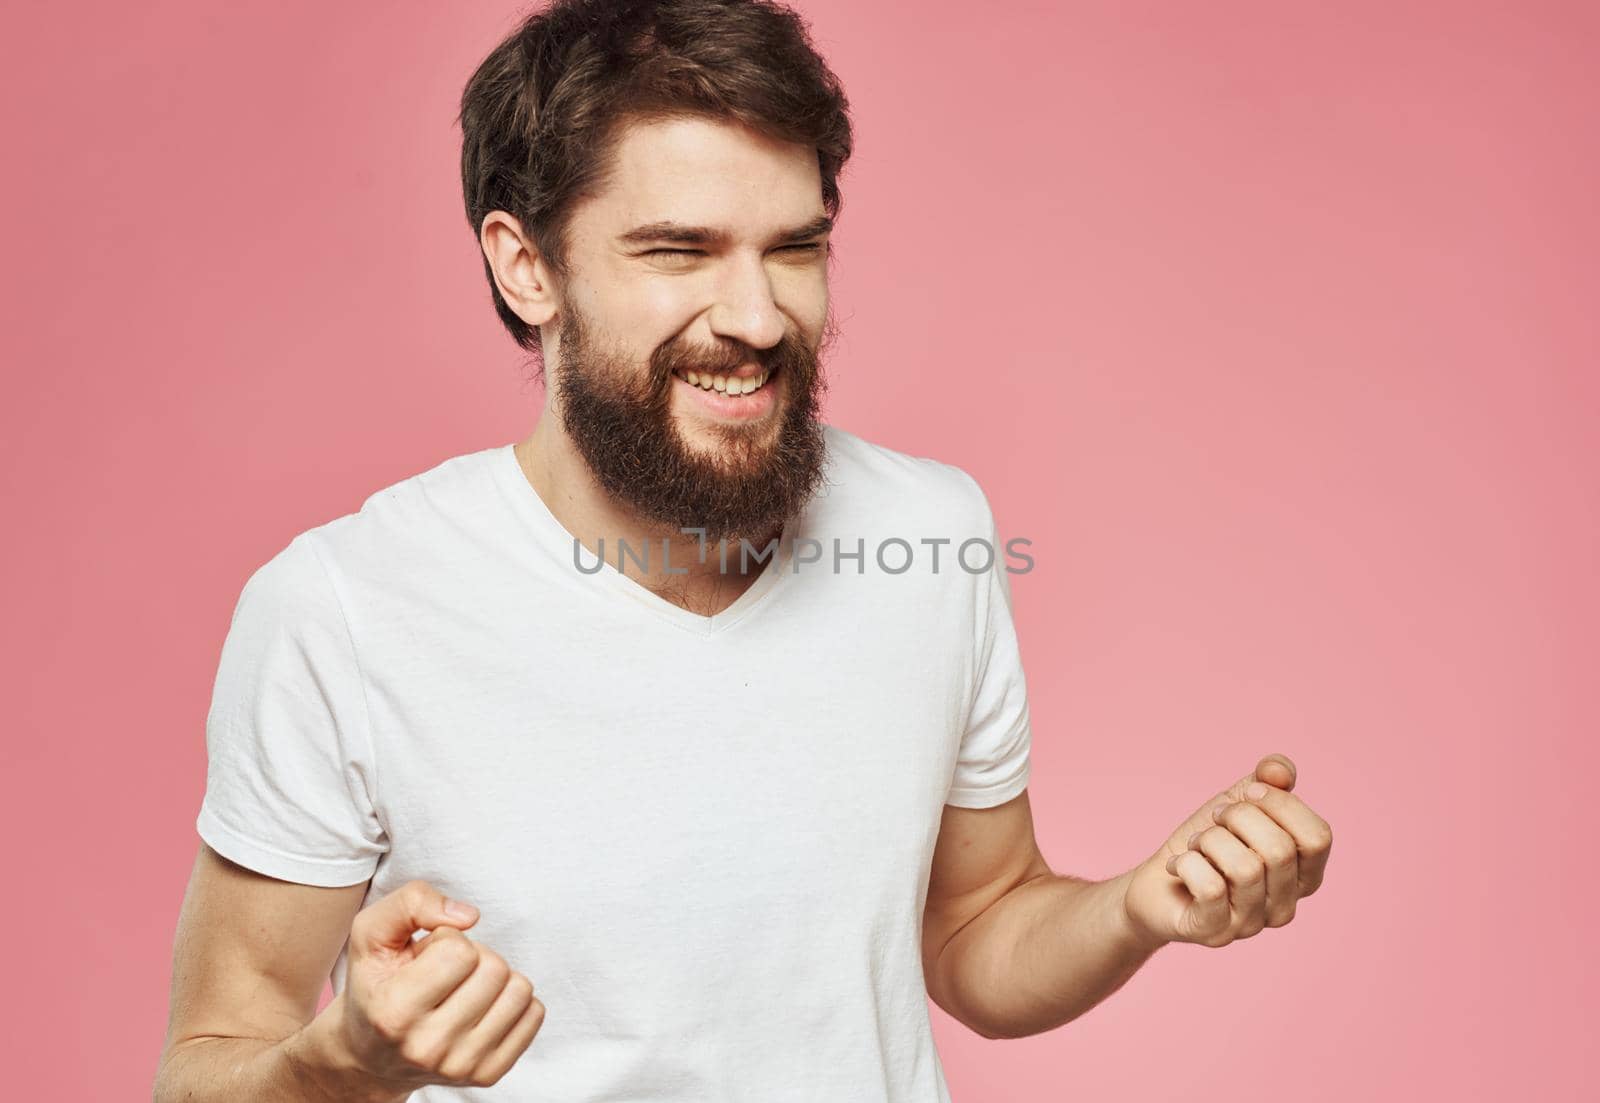 emotional man on pink background gesturing with his hands fun. High quality photo